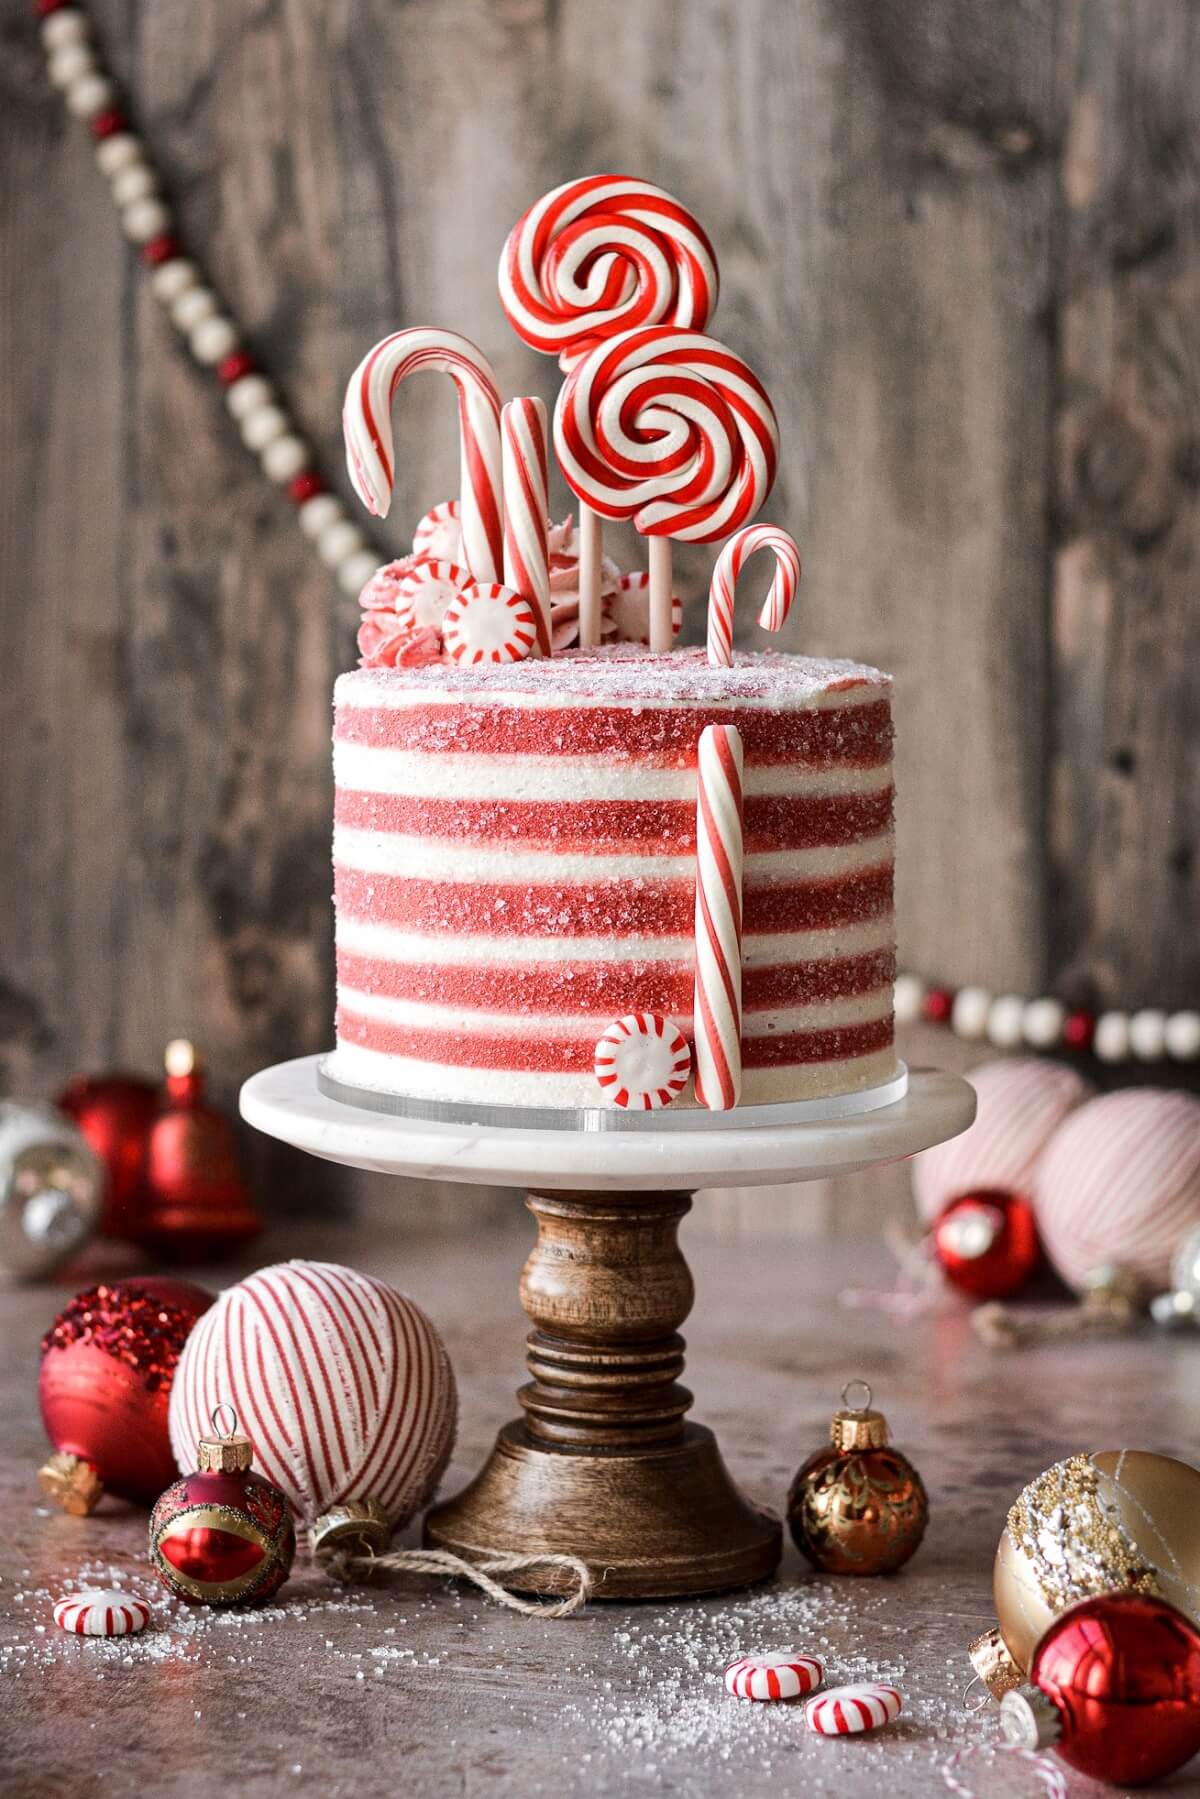 Candy cane cake with red and white striped buttercream and decorated with candy canes and peppermints.